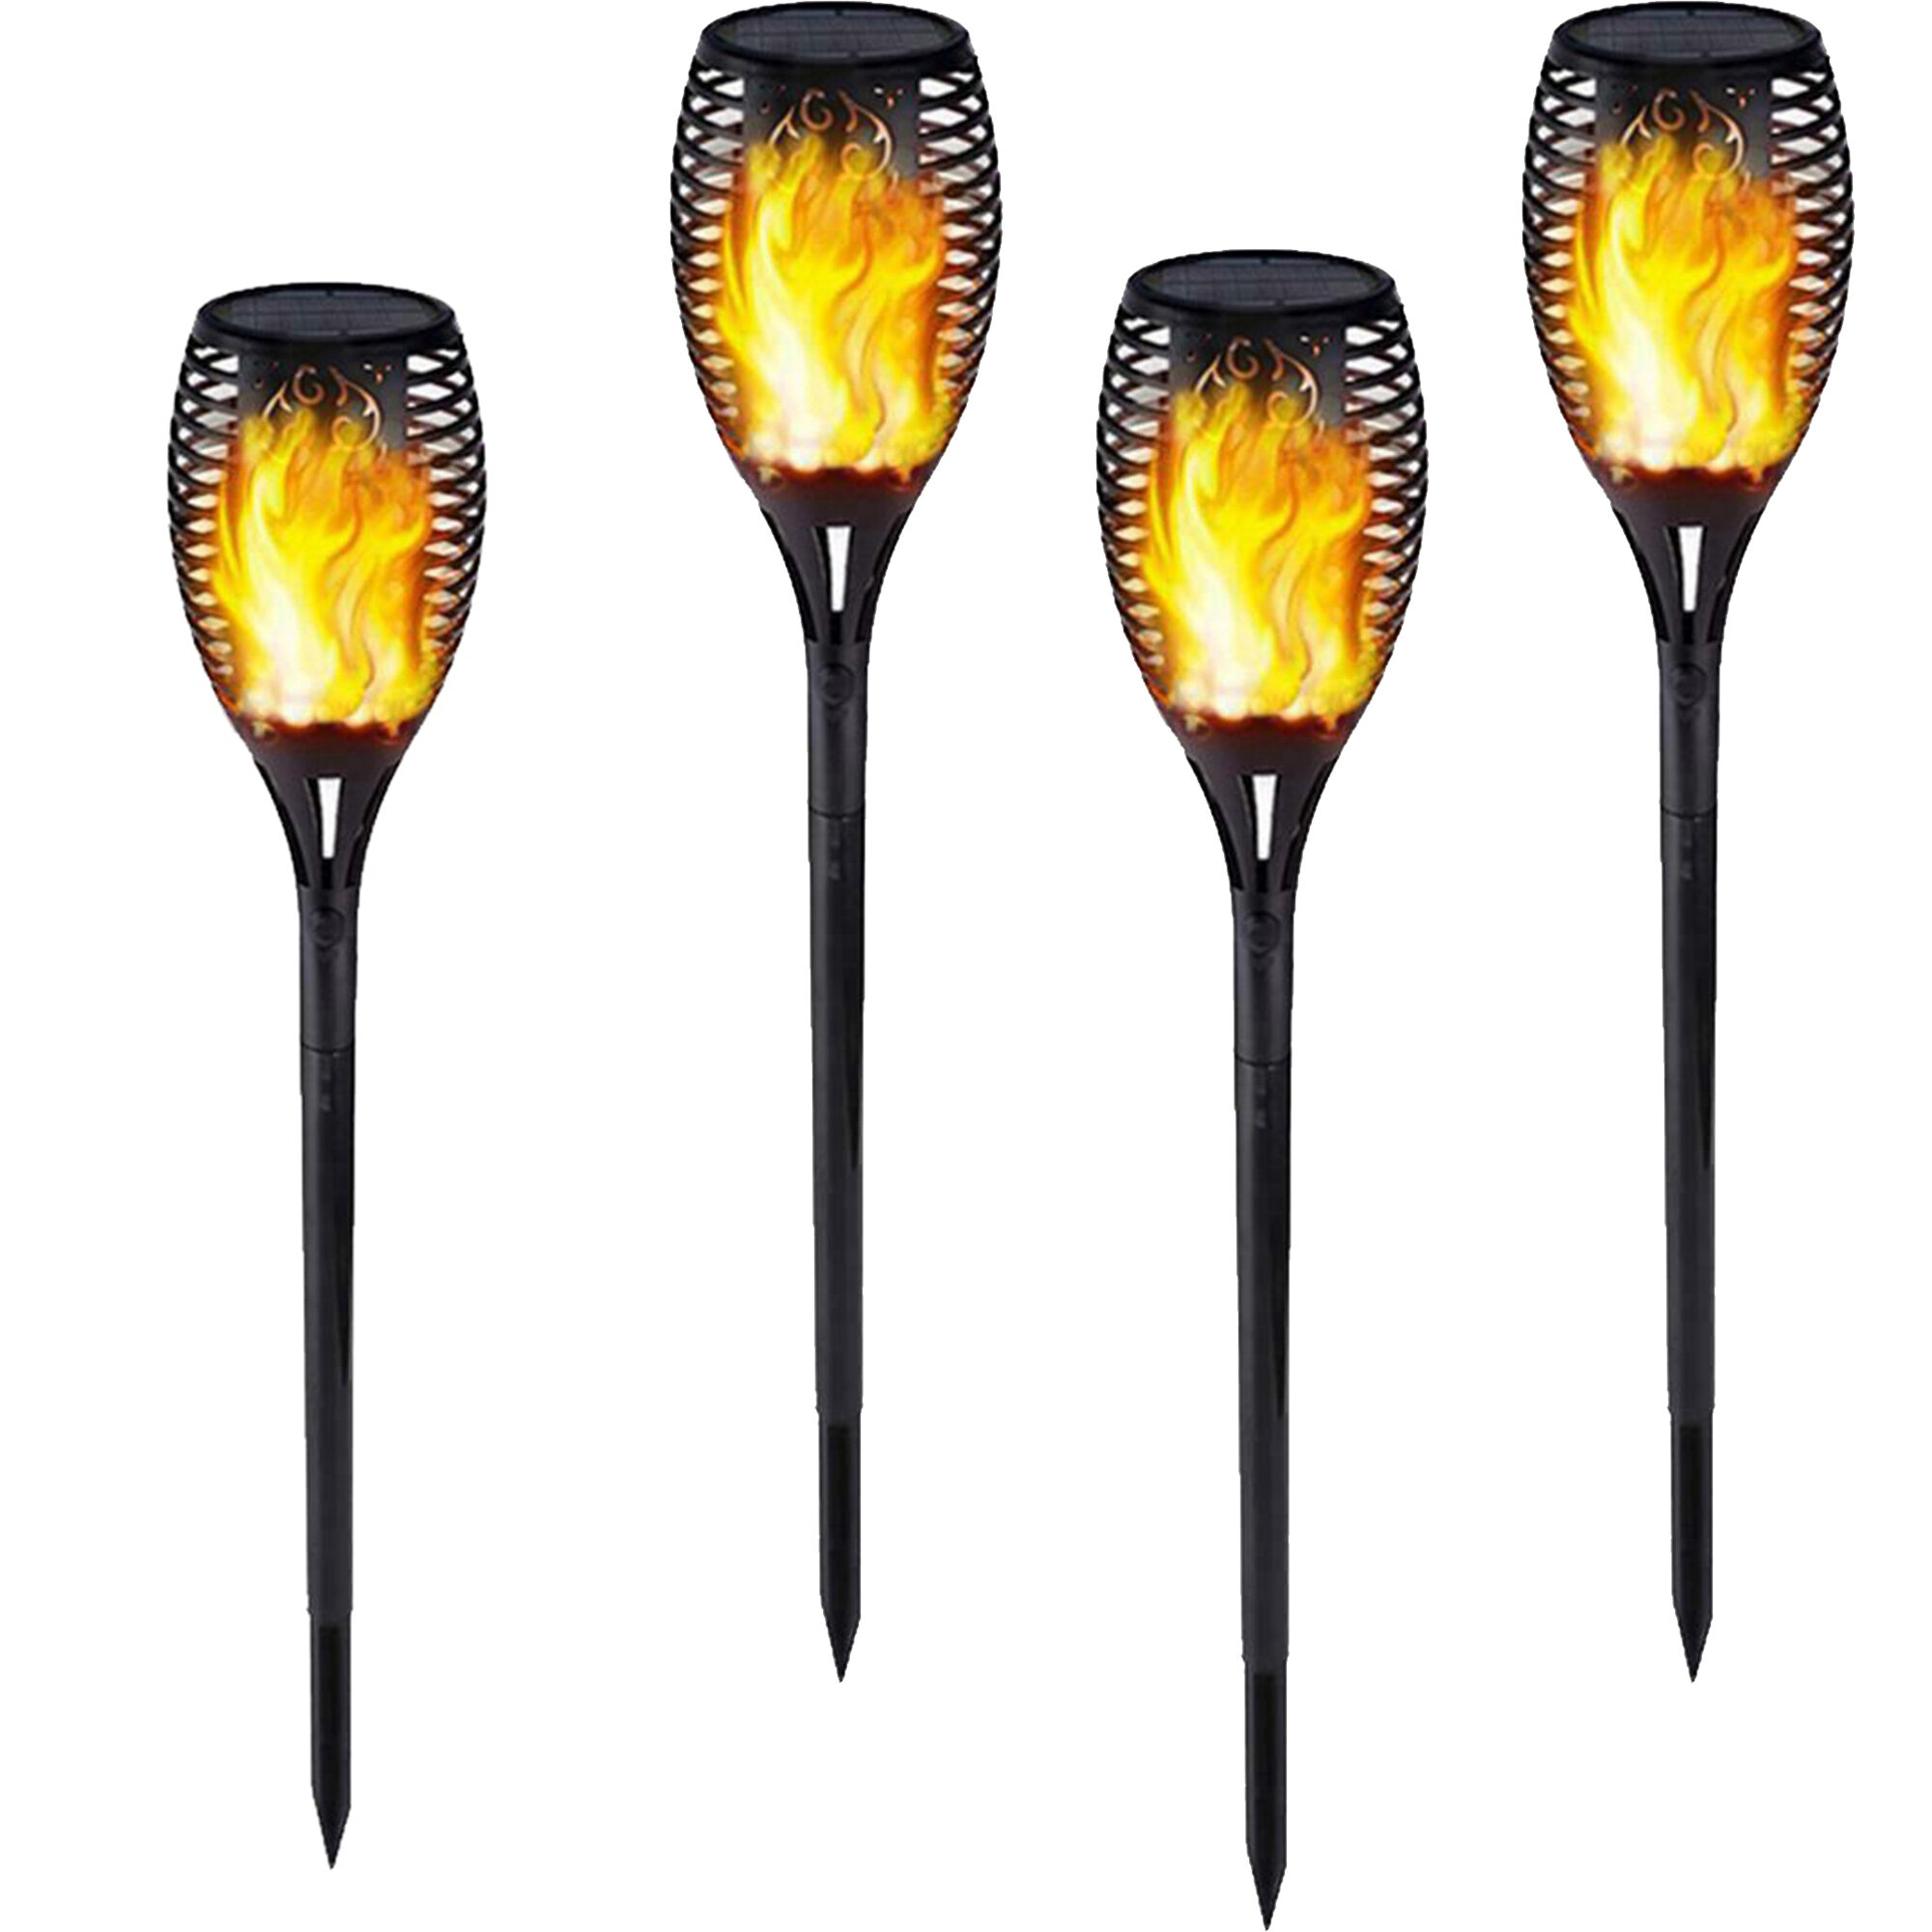 Flickering LED Solar Flame Torch Light Outdoor Garden Yard Lawn Pathway Lamp 